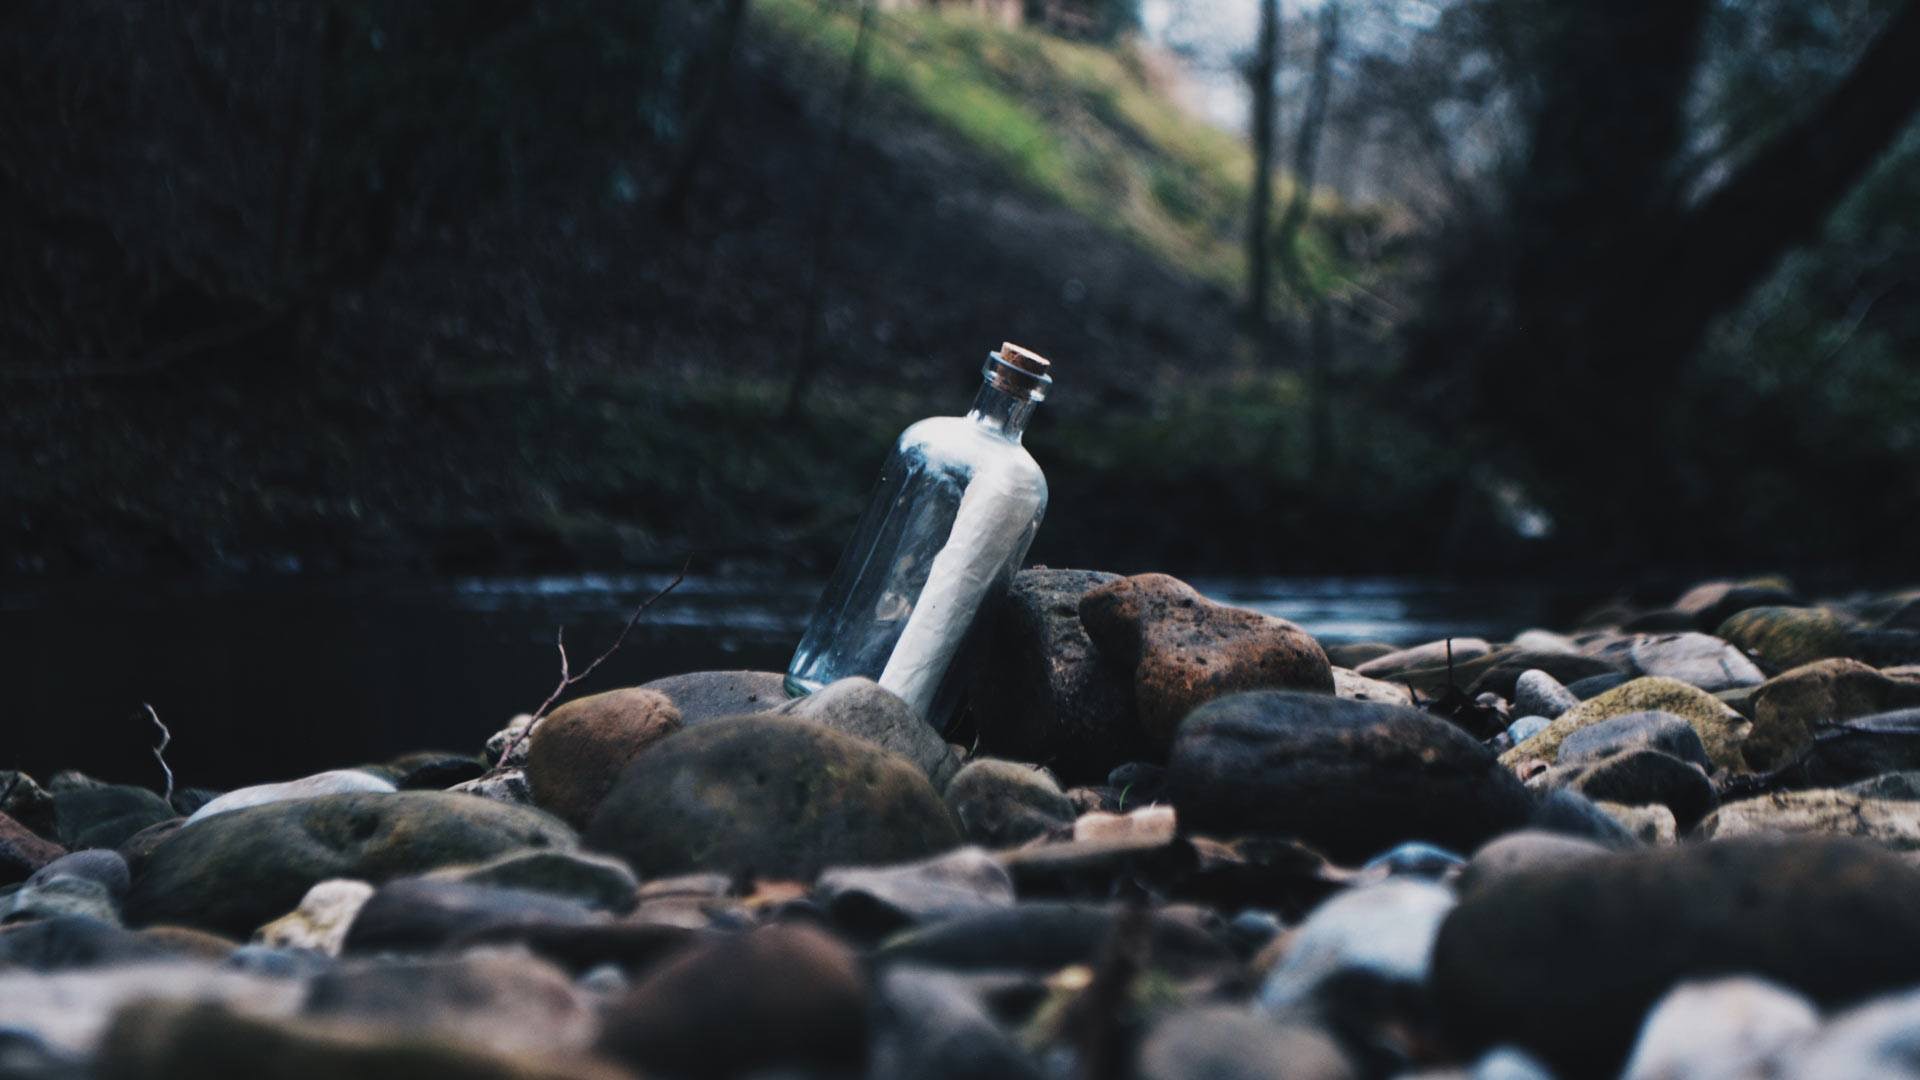 Bottle with Paper inside in the Middle of a Creek